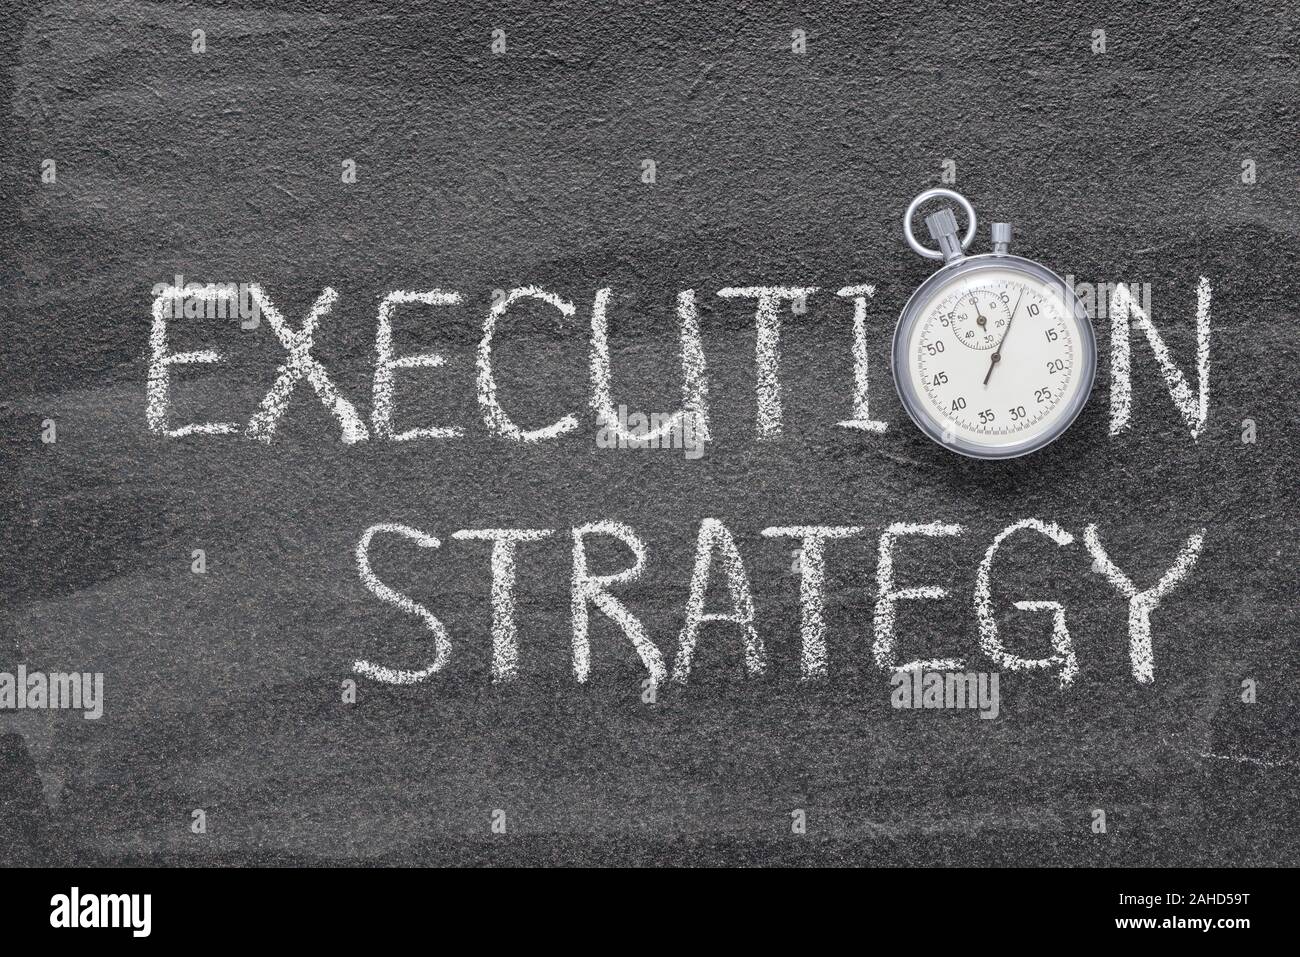 execution strategy phrase written on chalkboard with vintage precise stopwatch Stock Photo